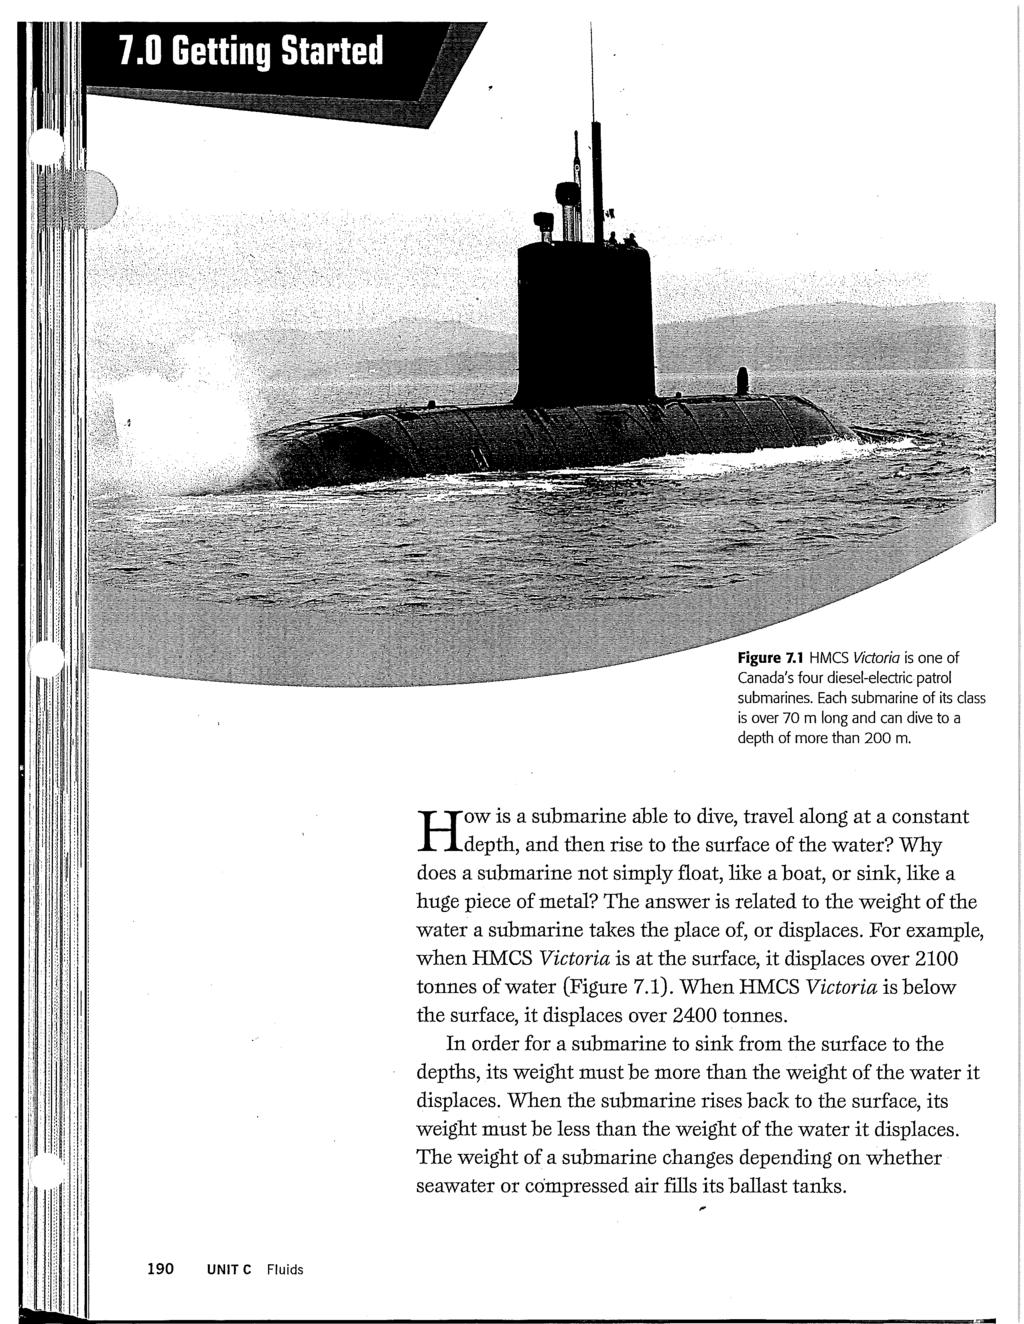 7.0 Getting Started Figure 7.1 HMCS Victoria is one of Canada's four diesel-electric patrol submarines. Each submarine of its class is over 70 m long and can dive to a depth of more than 200 m.